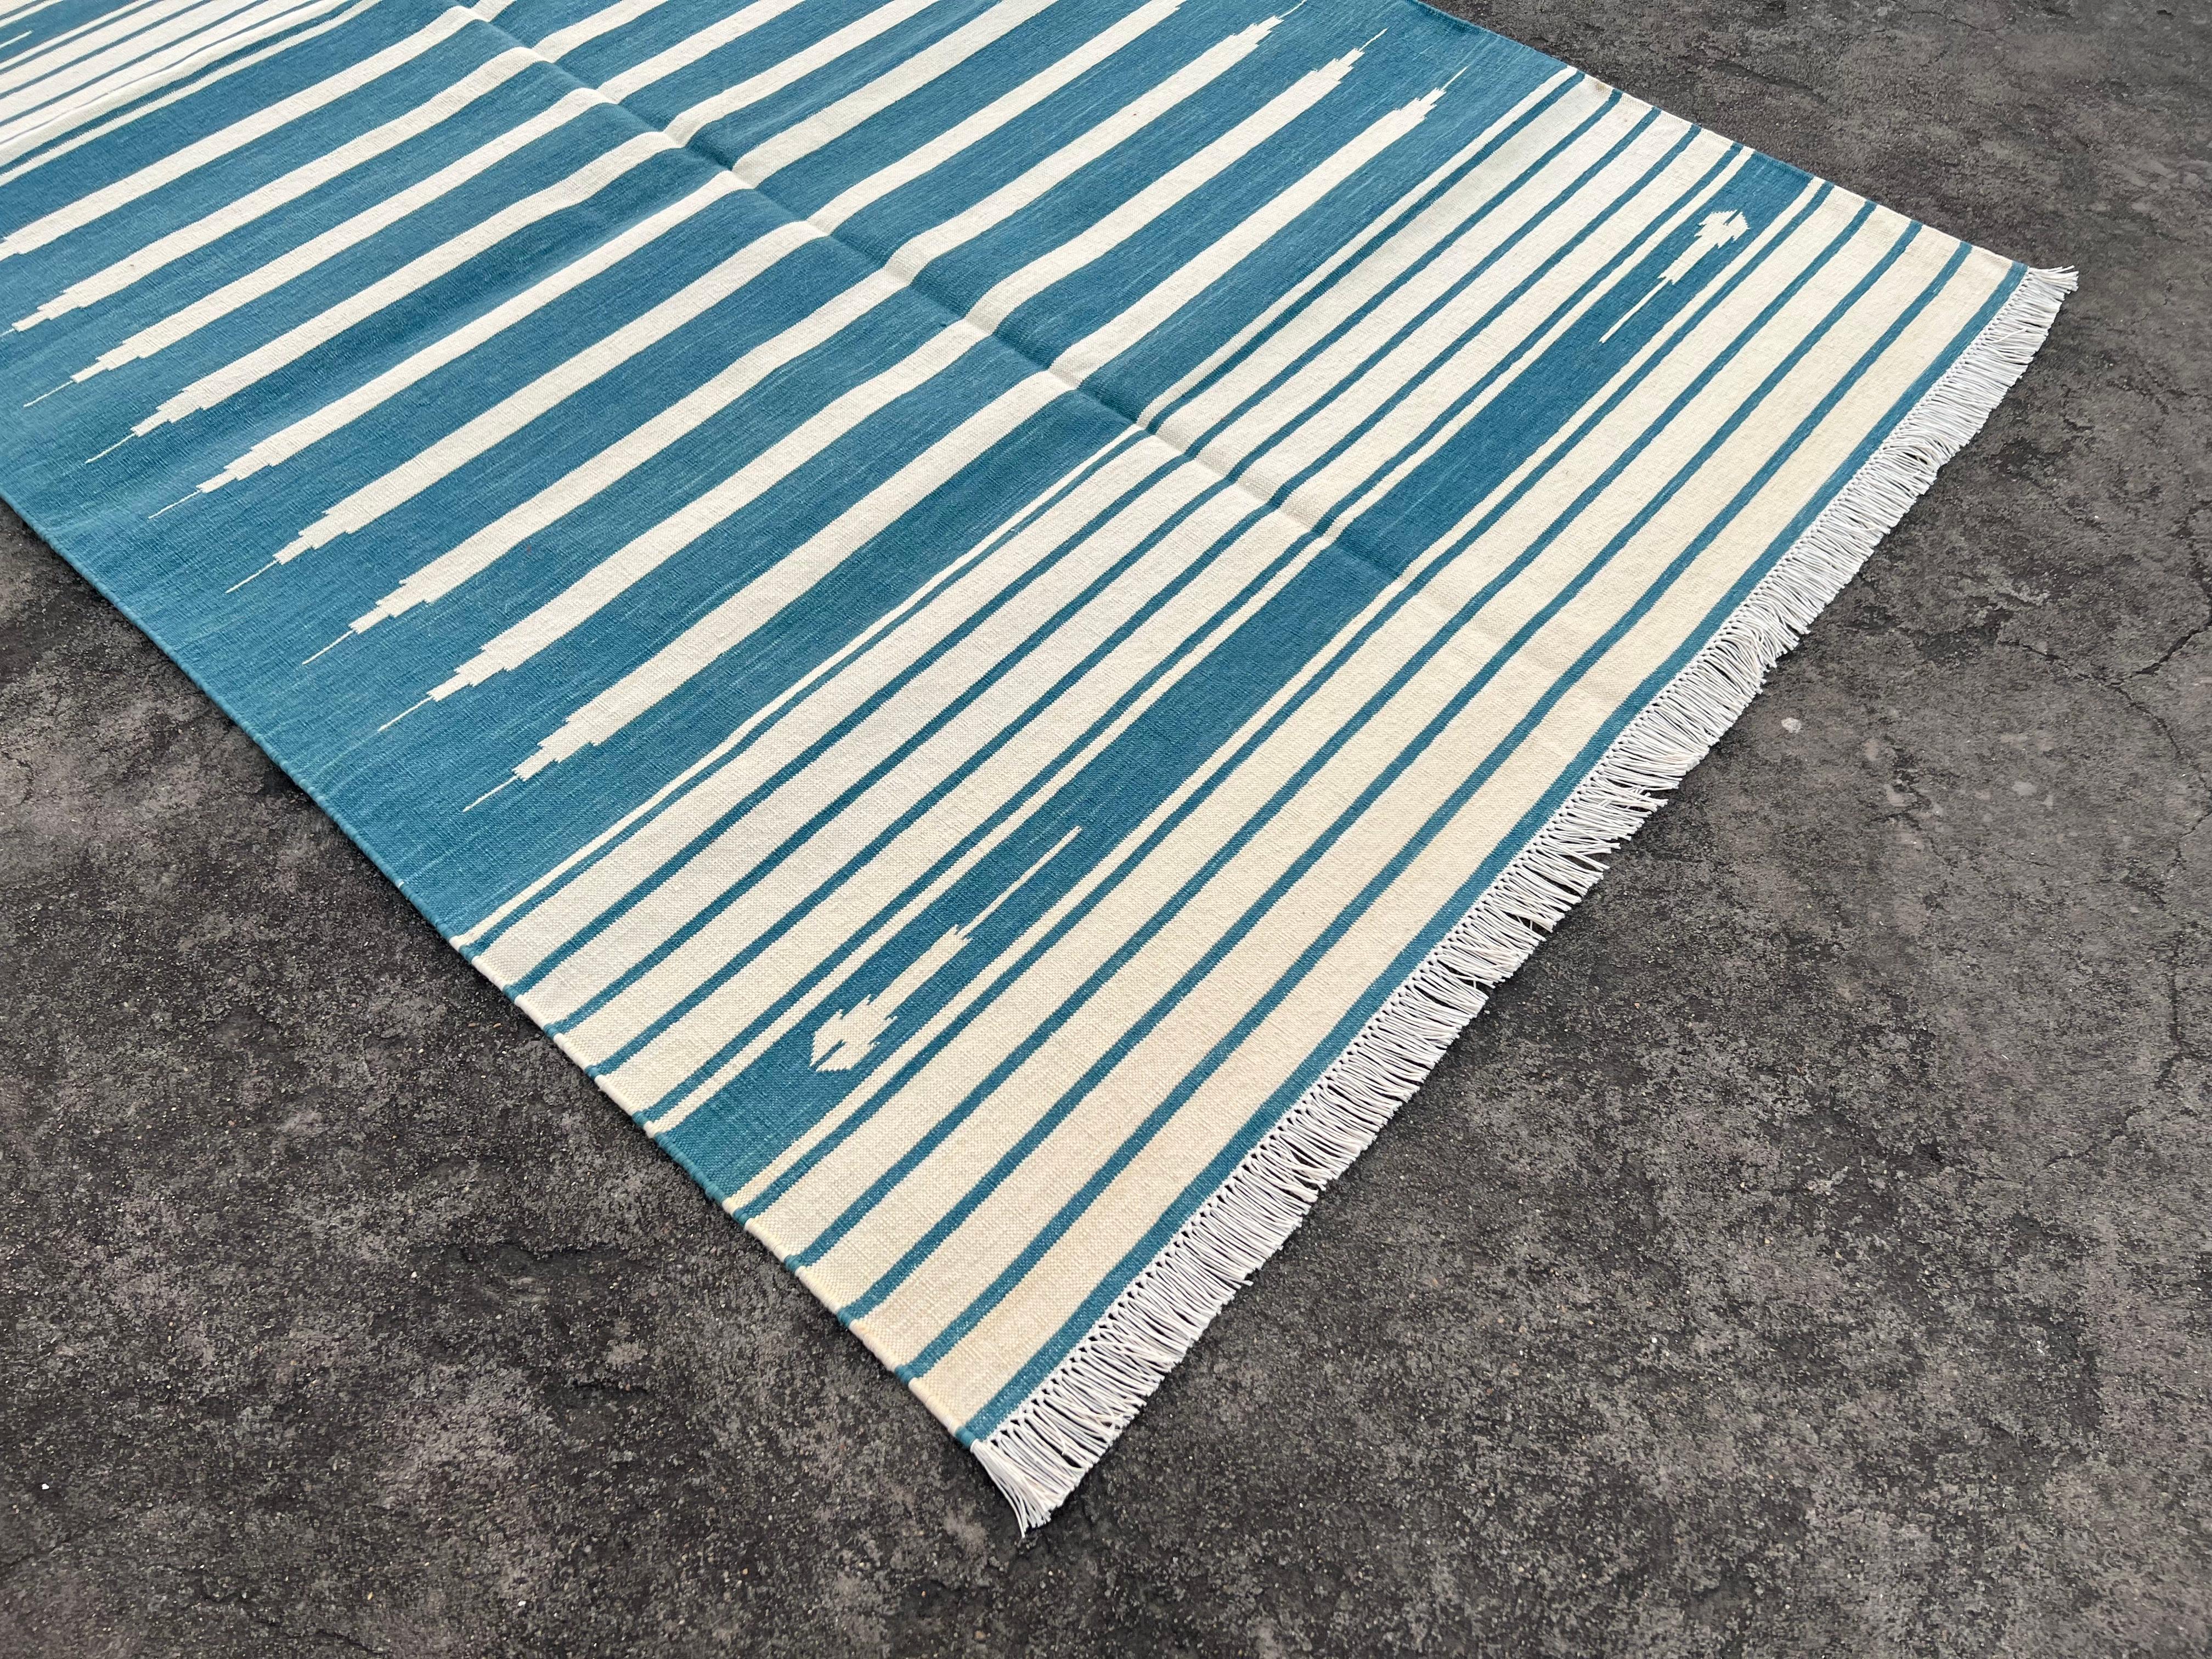 Hand-Woven Handmade Cotton Area Flat Weave Rug, 4x6 Cream And Blue Striped Indian Dhurrie For Sale